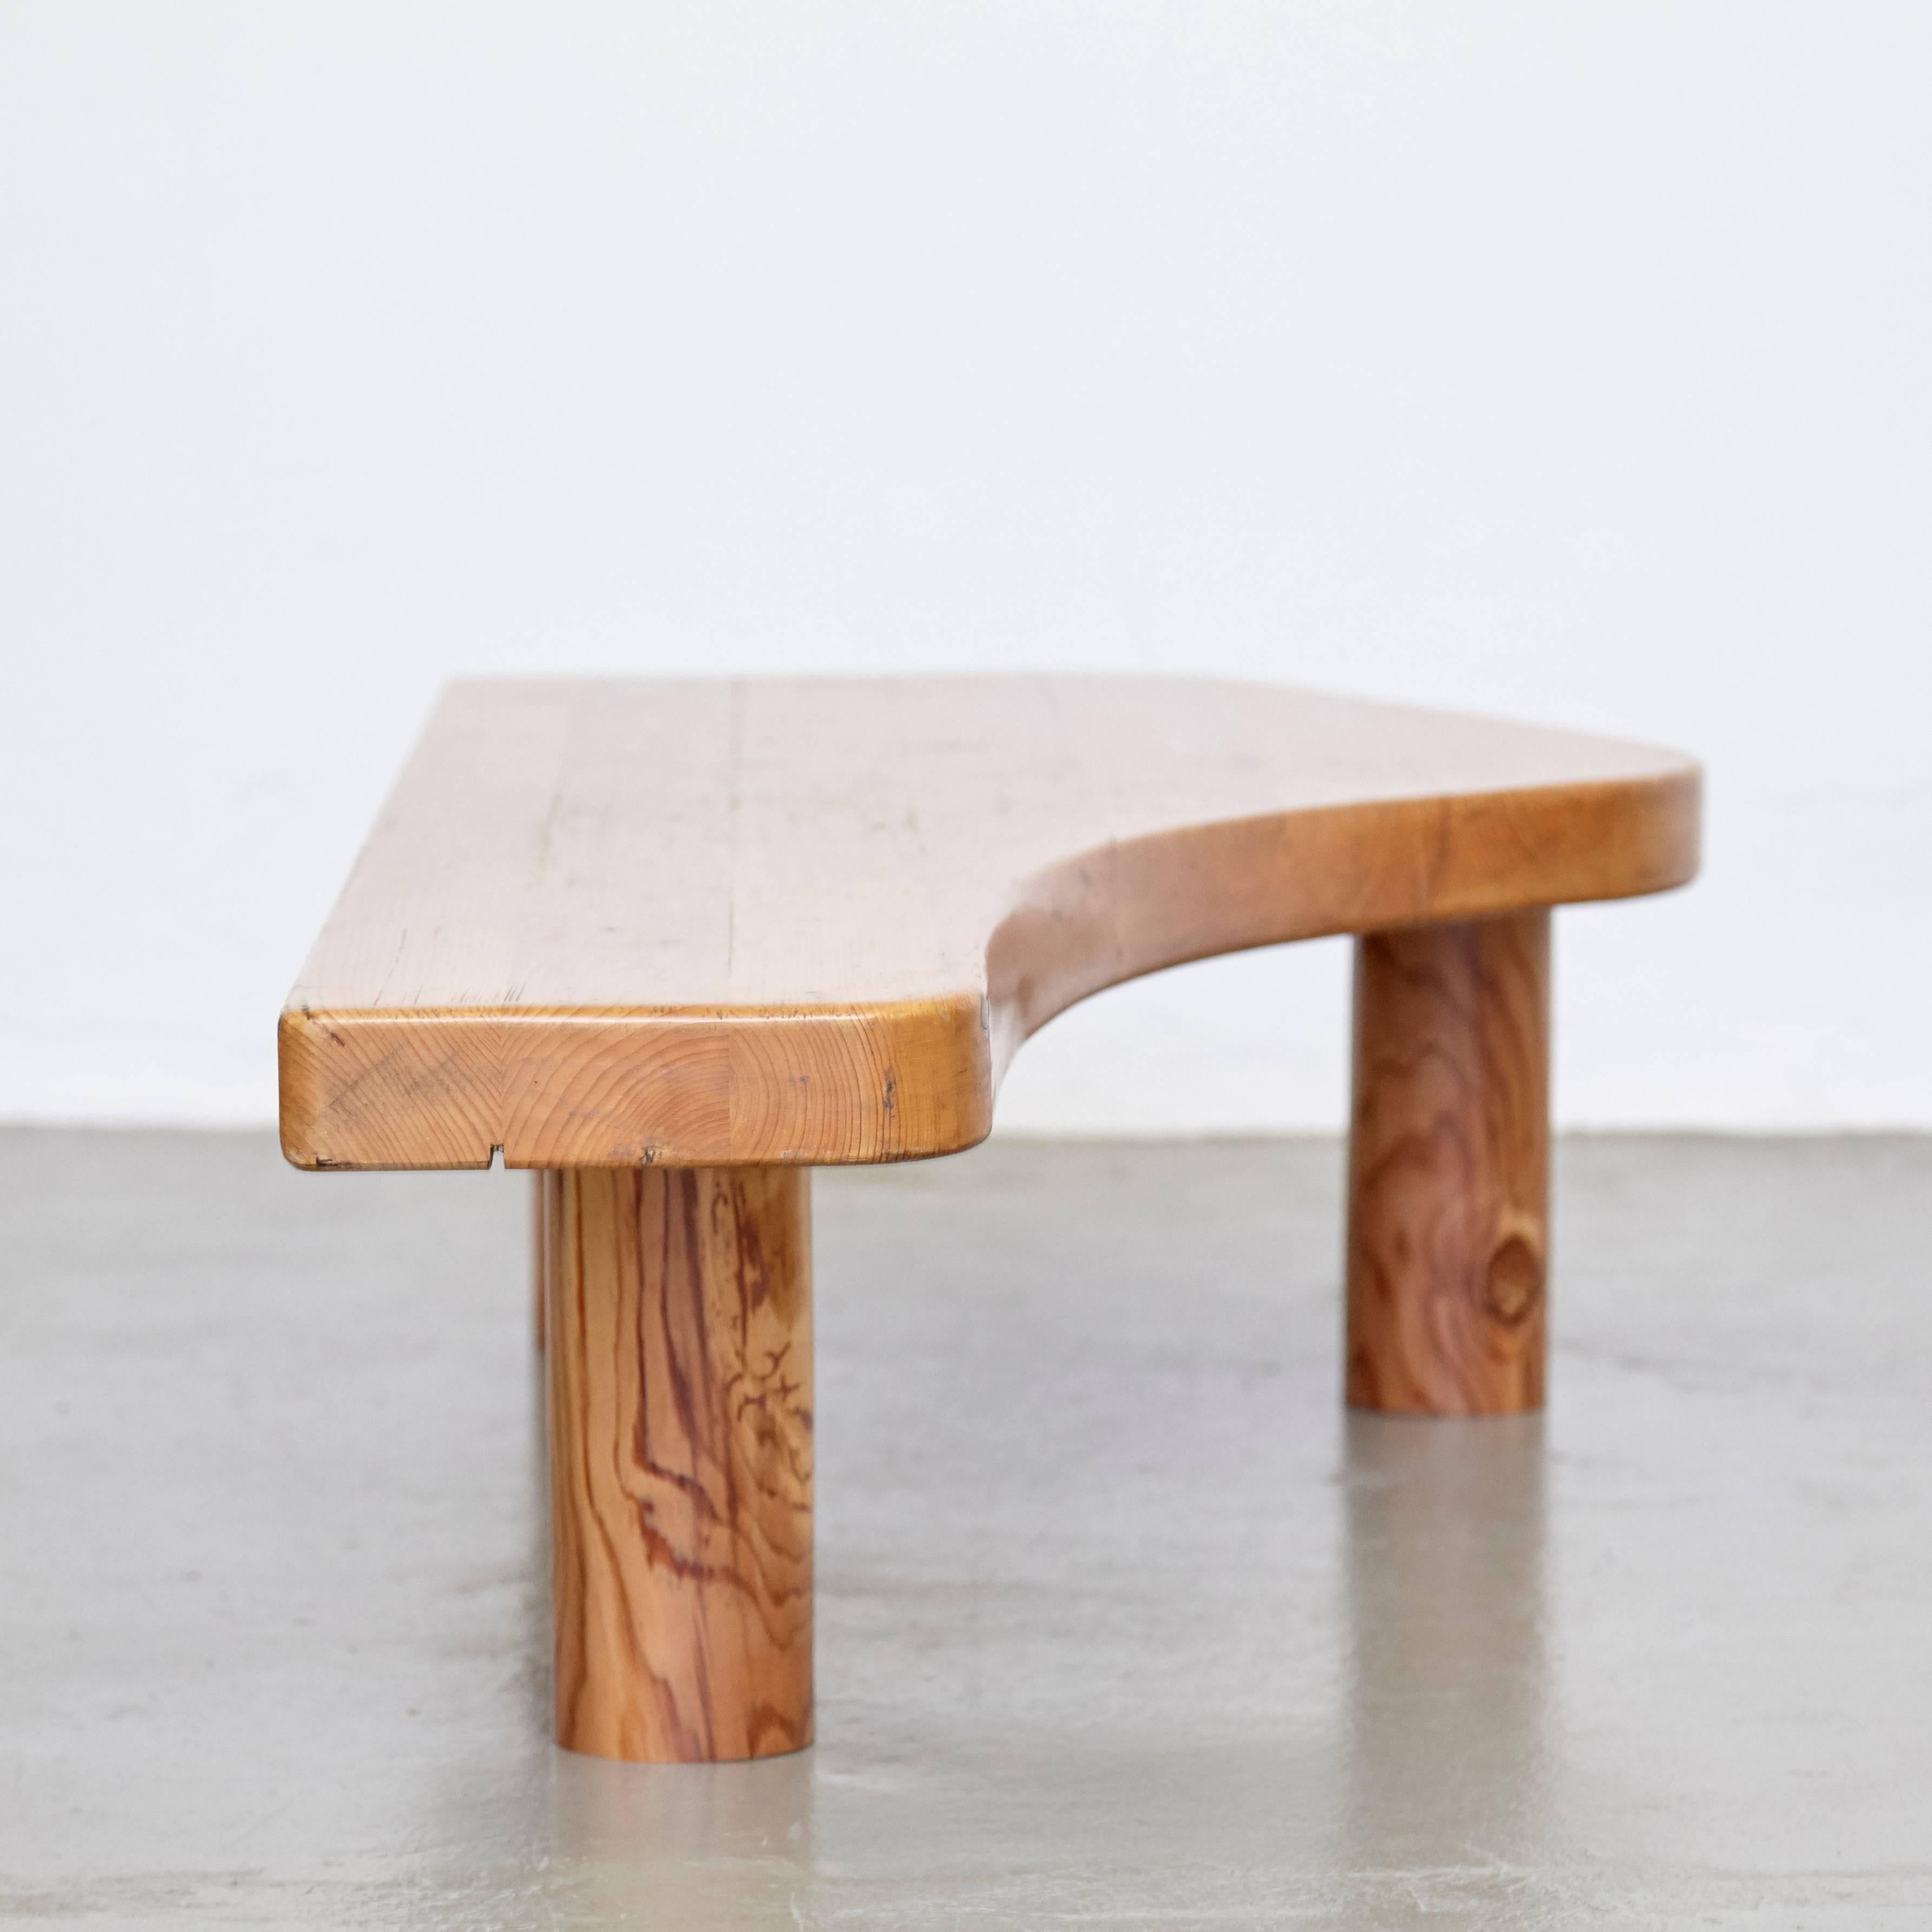 Pine Charlotte Perriand Style Free-Form Low Table, circa 1970